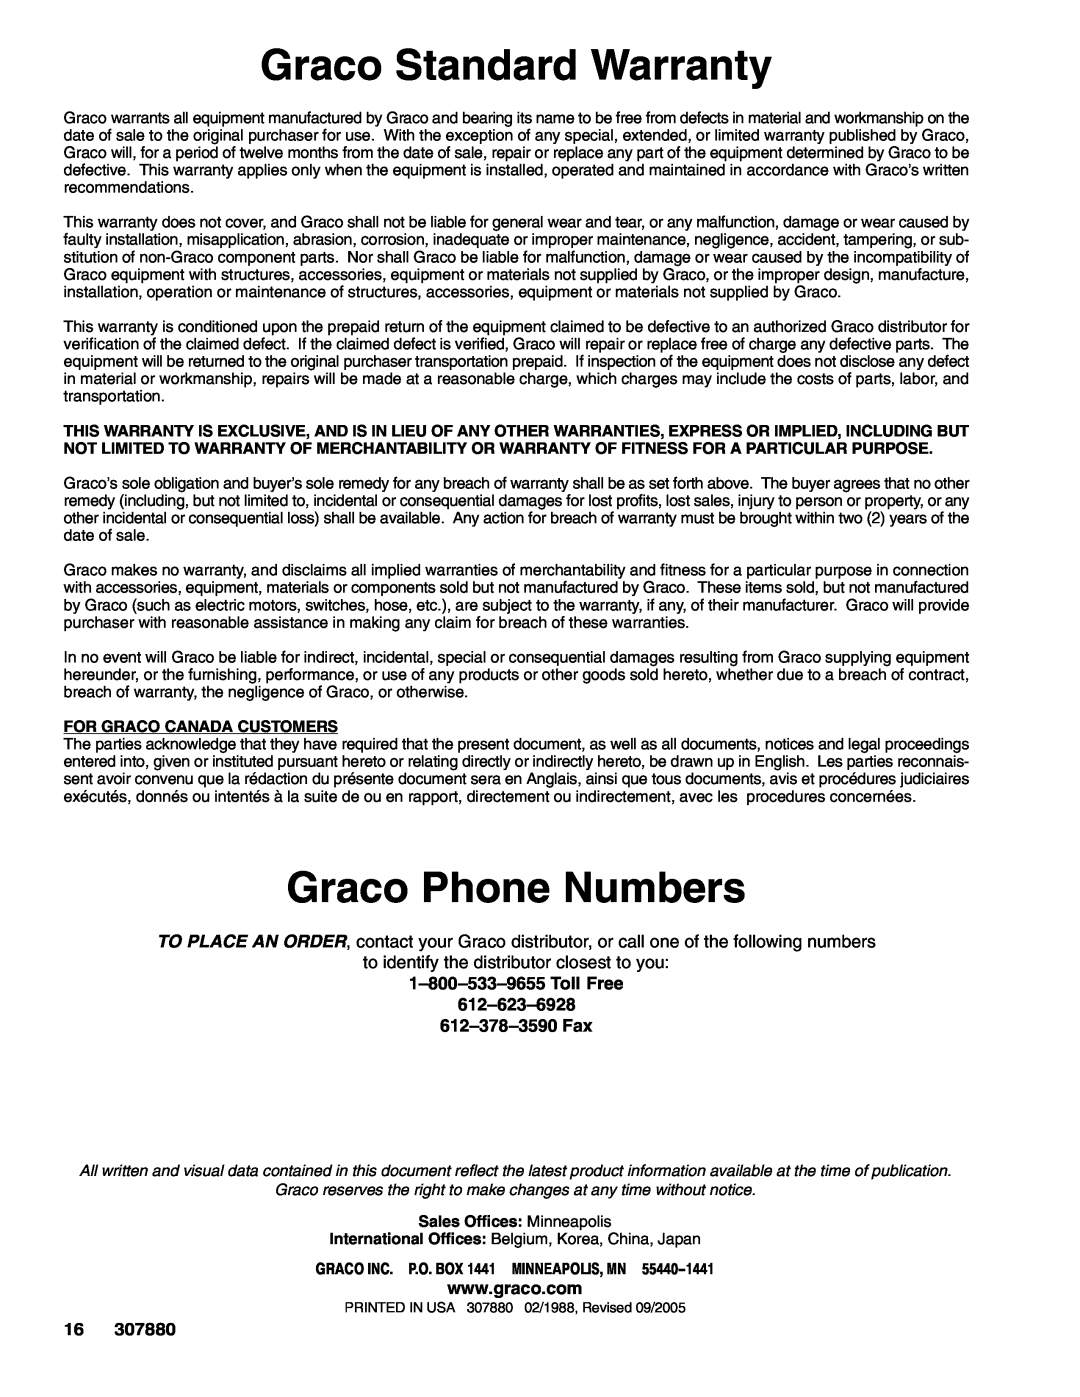 Graco 425, 300 Graco Standard Warranty, Graco Phone Numbers, For Graco Canada Customers, Sales Offices Minneapolis 